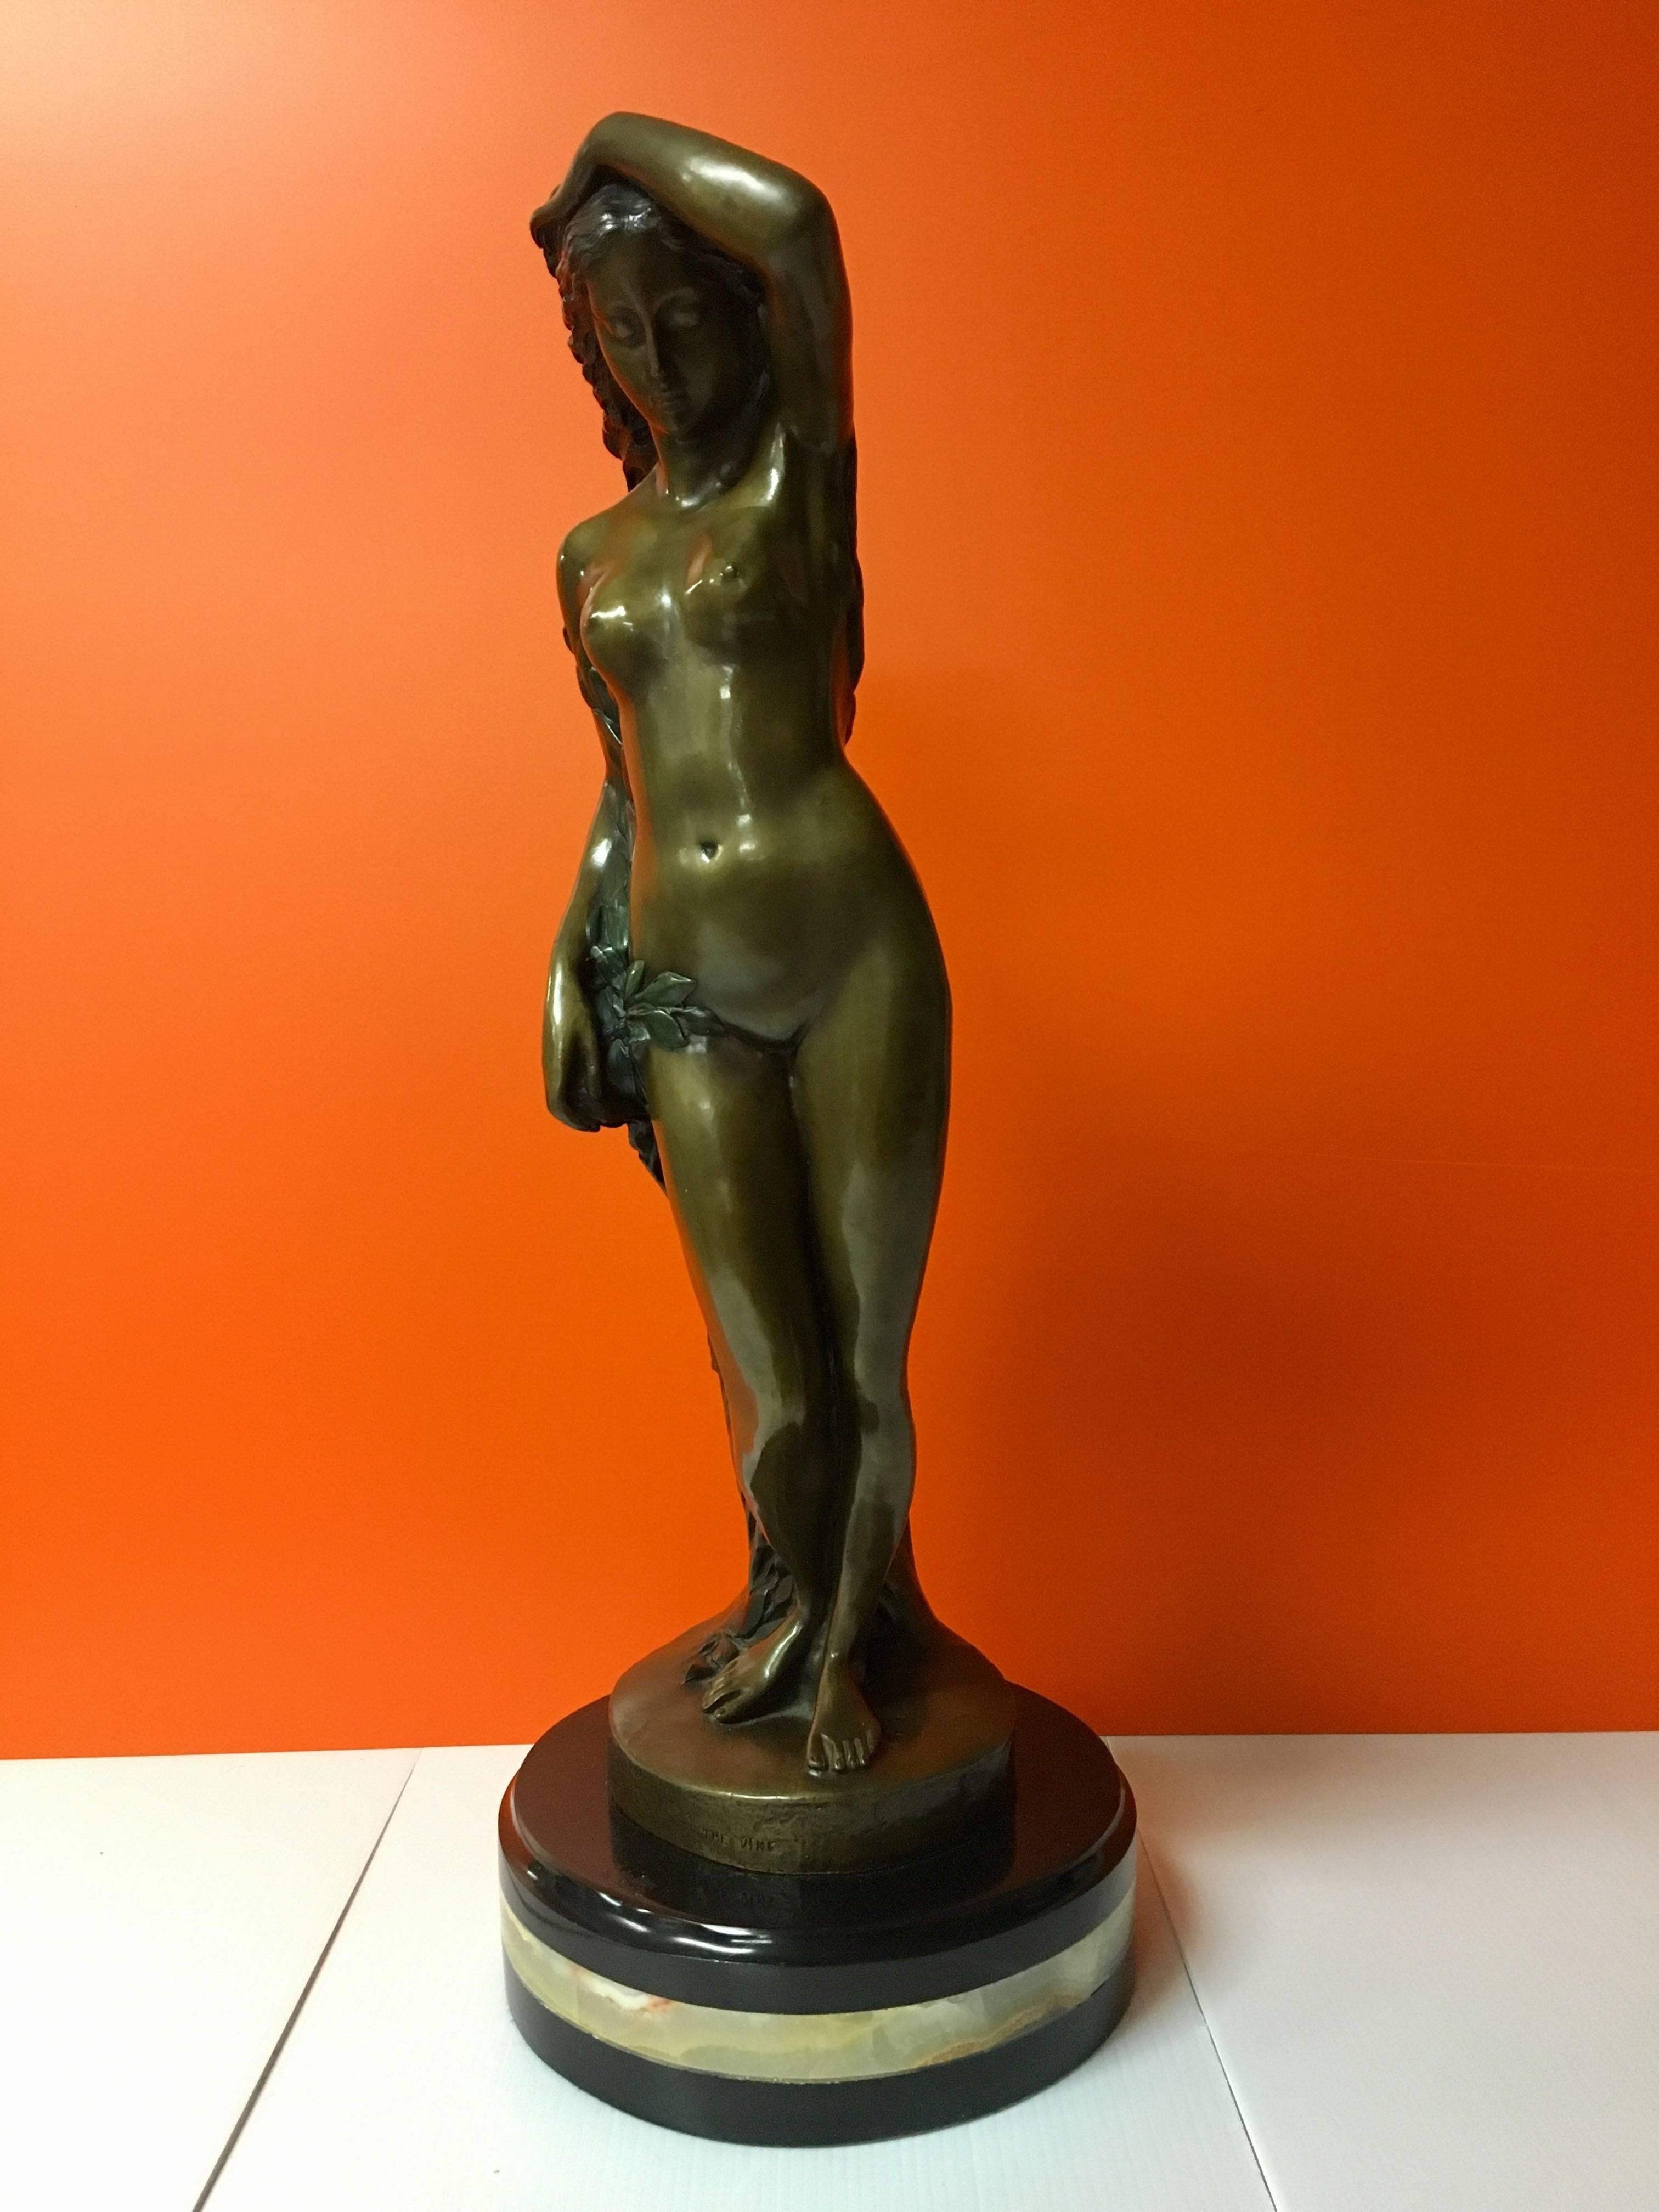 Well cast and impressive sculpture of a nude woman entitle "The Vine" numbered 9/100. Bronze cast on solid marble base. Measures: 24" high.